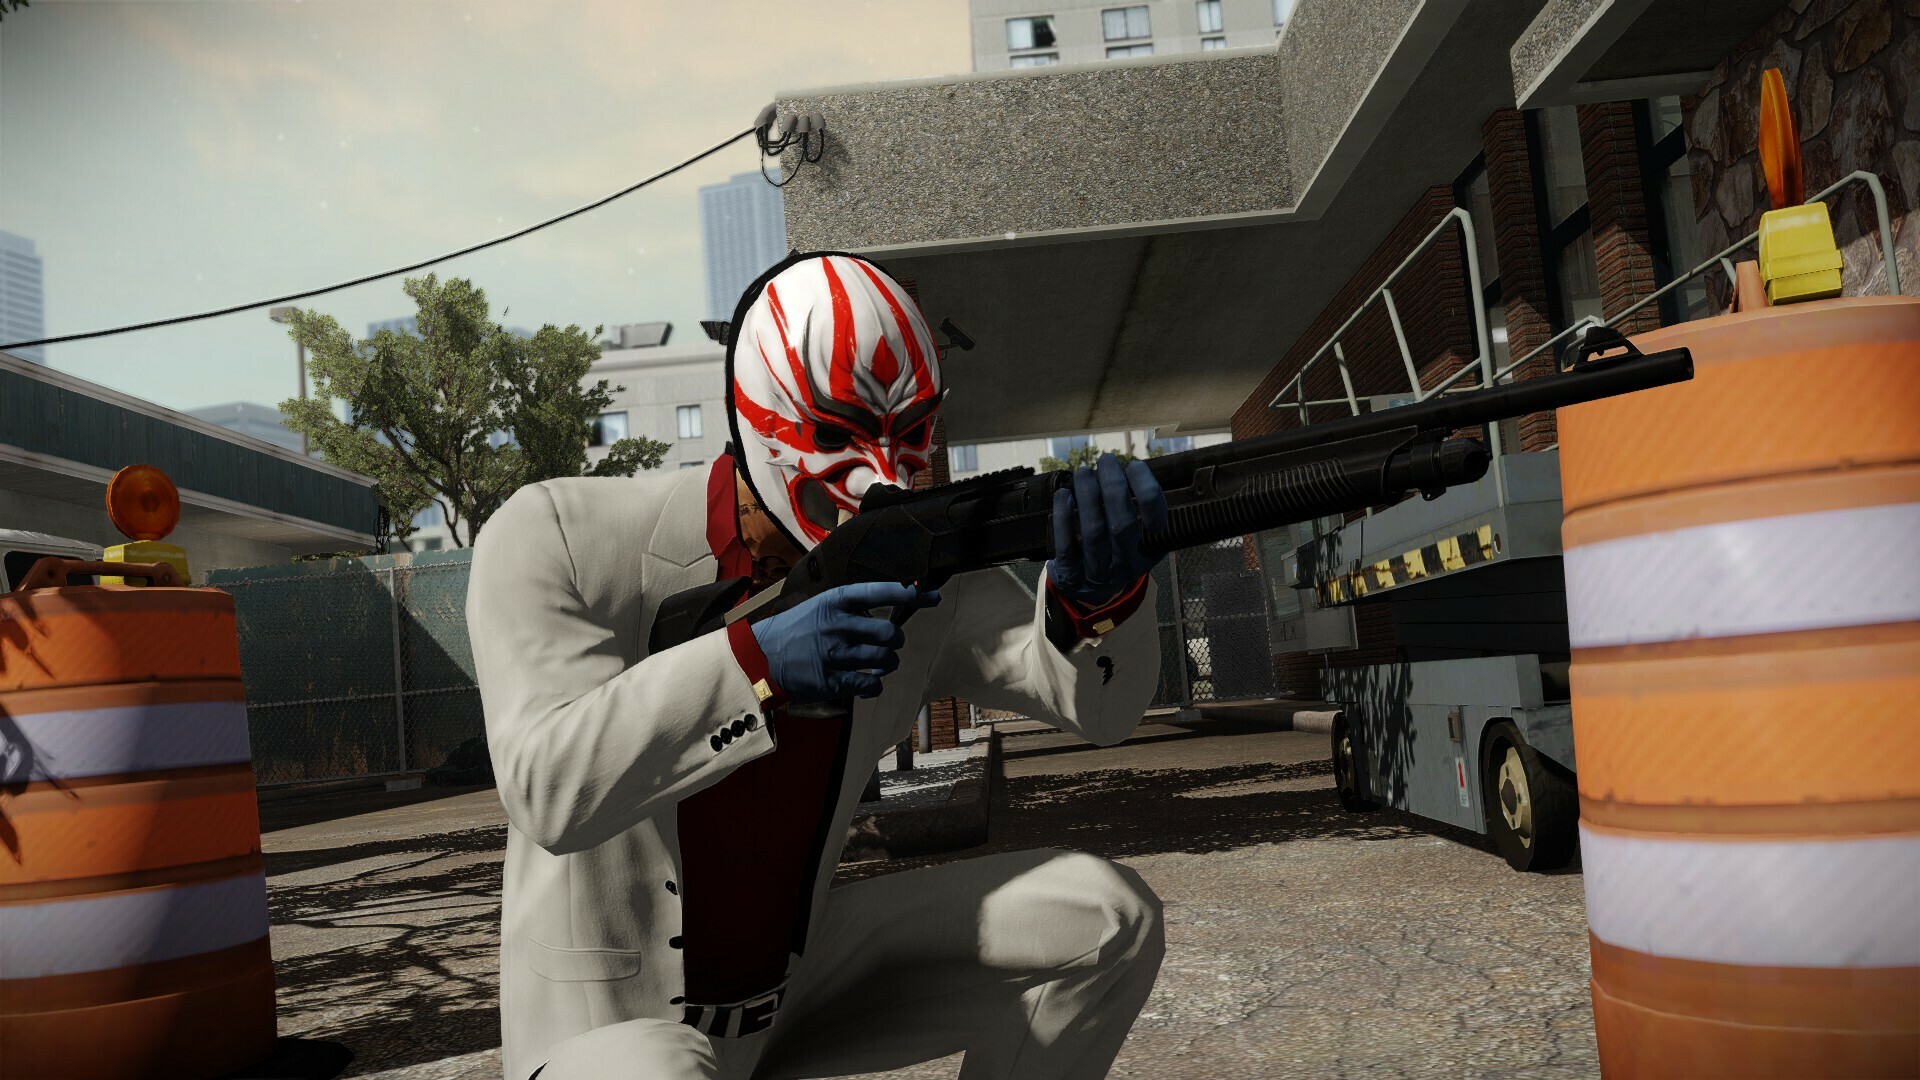 Completely overkill pack для payday 2 фото 39